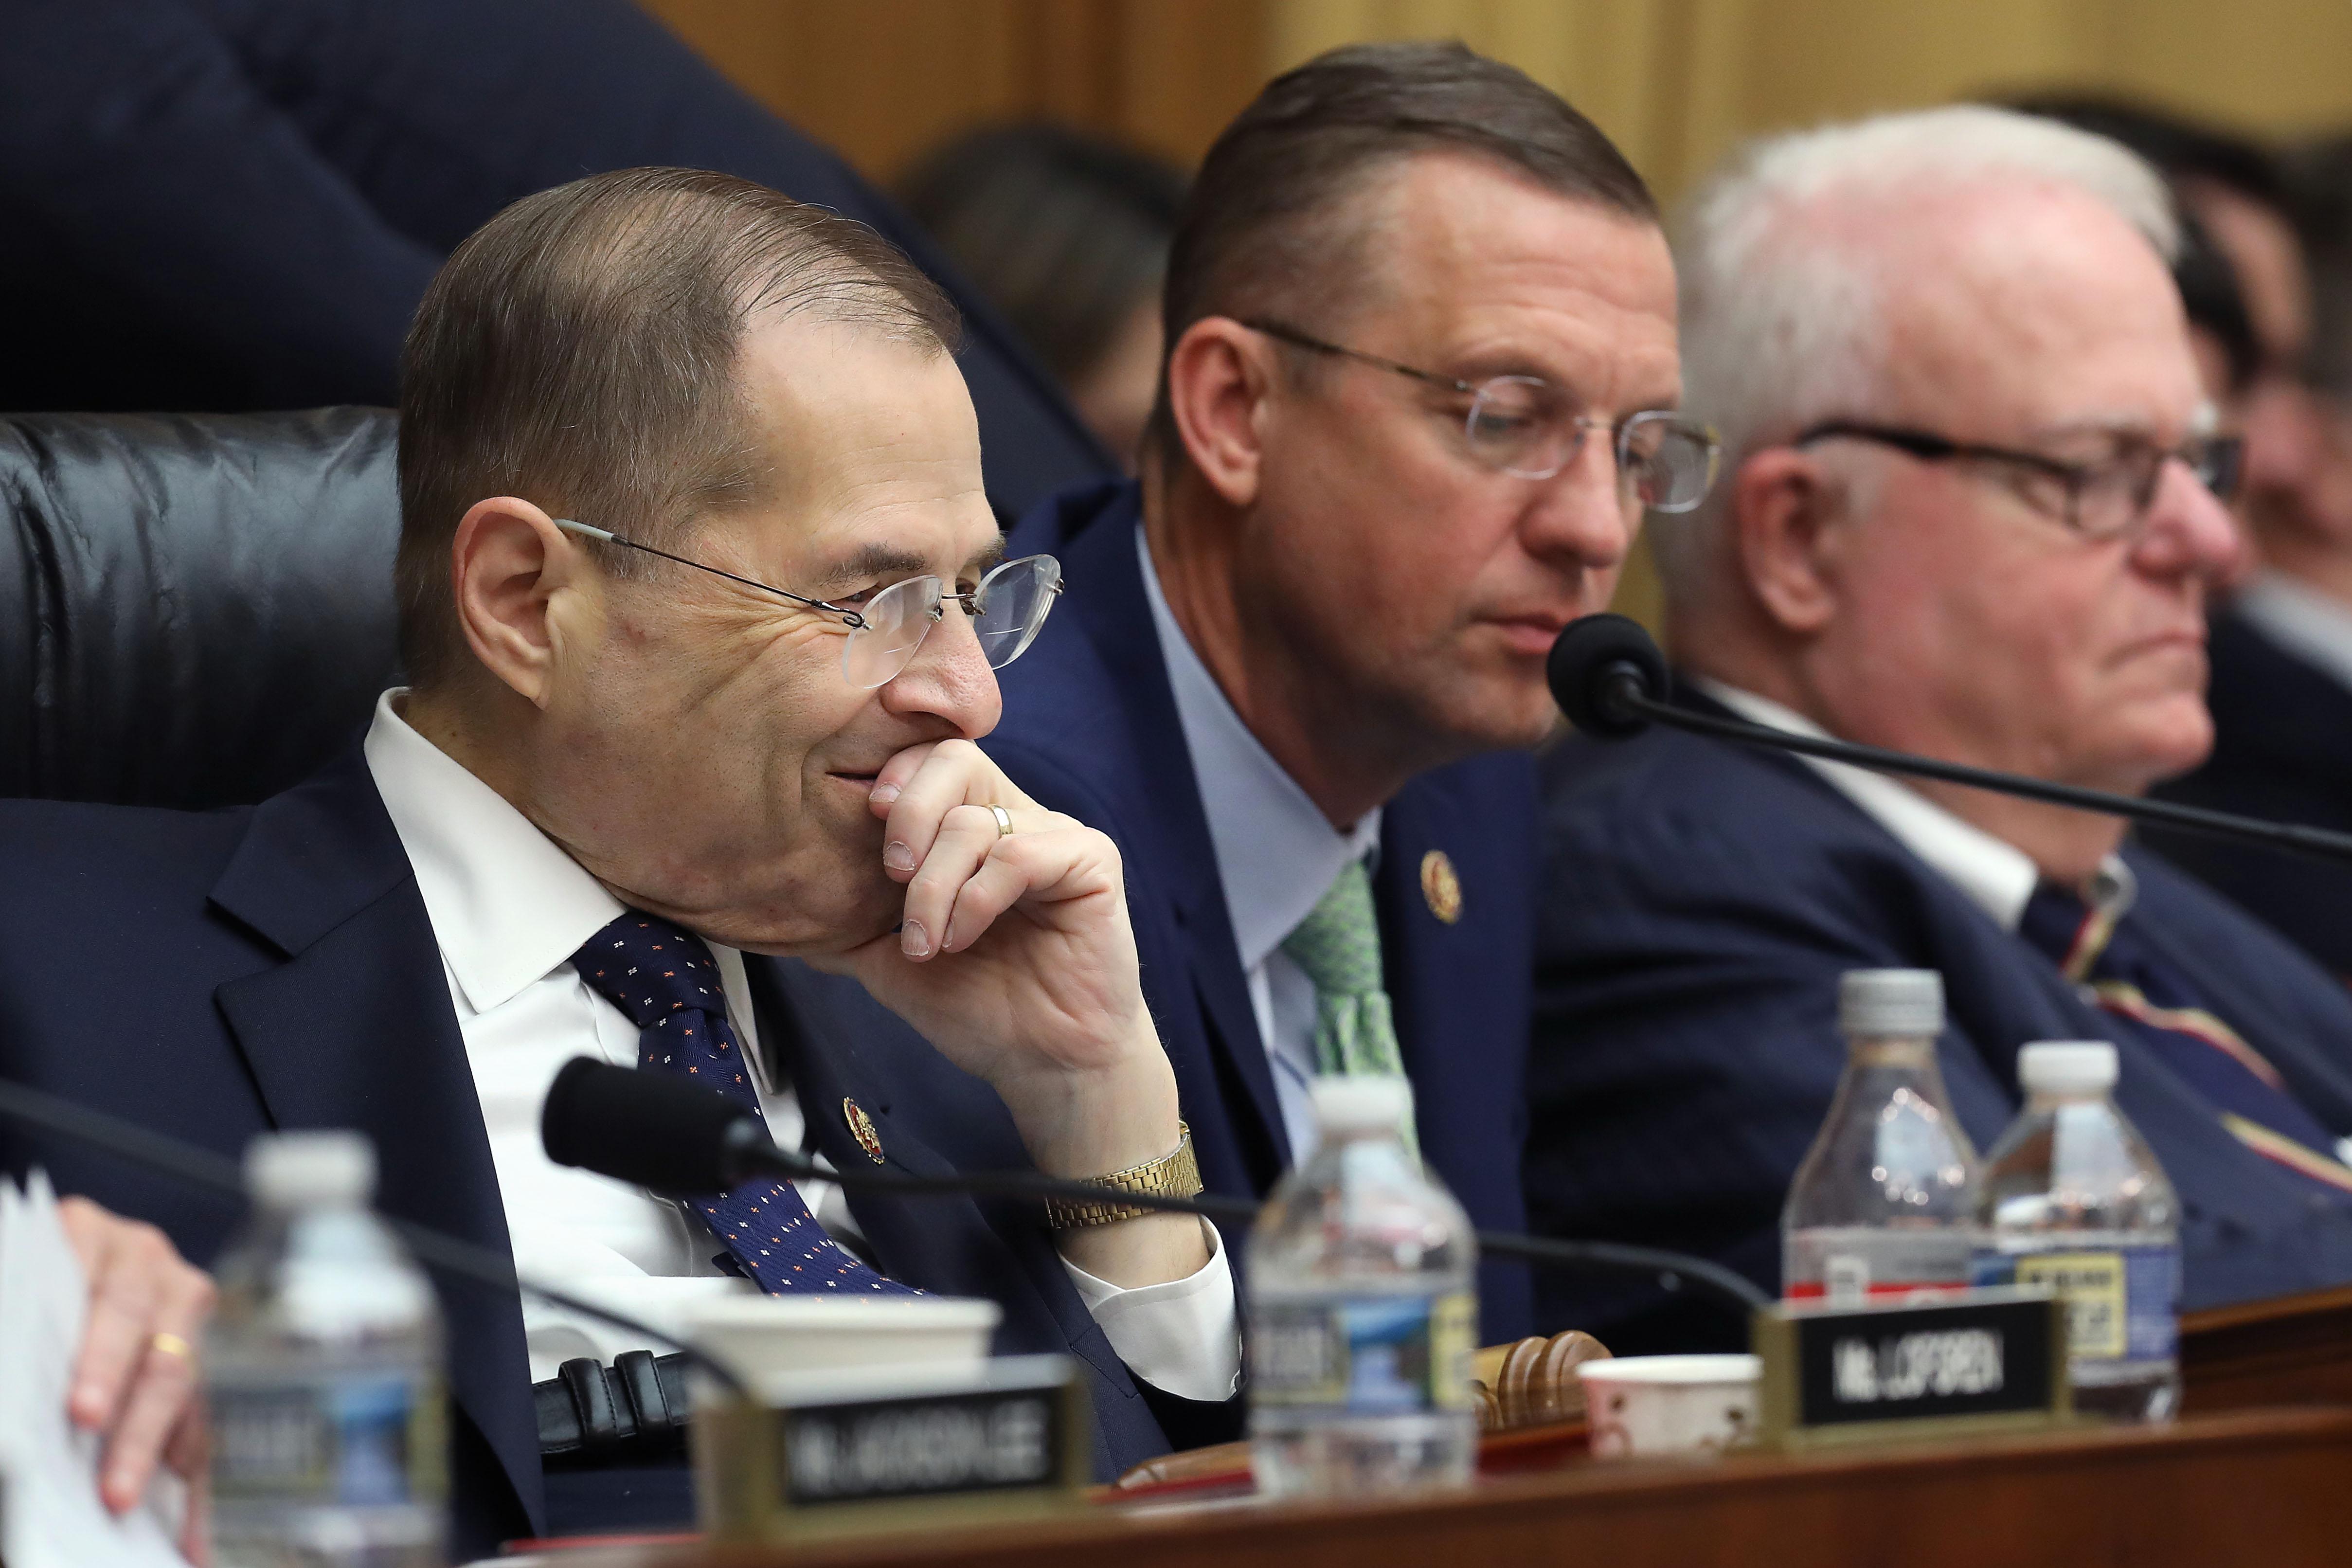 Jerrold Nadler and Doug Collins sit with other Congress members at a dais.